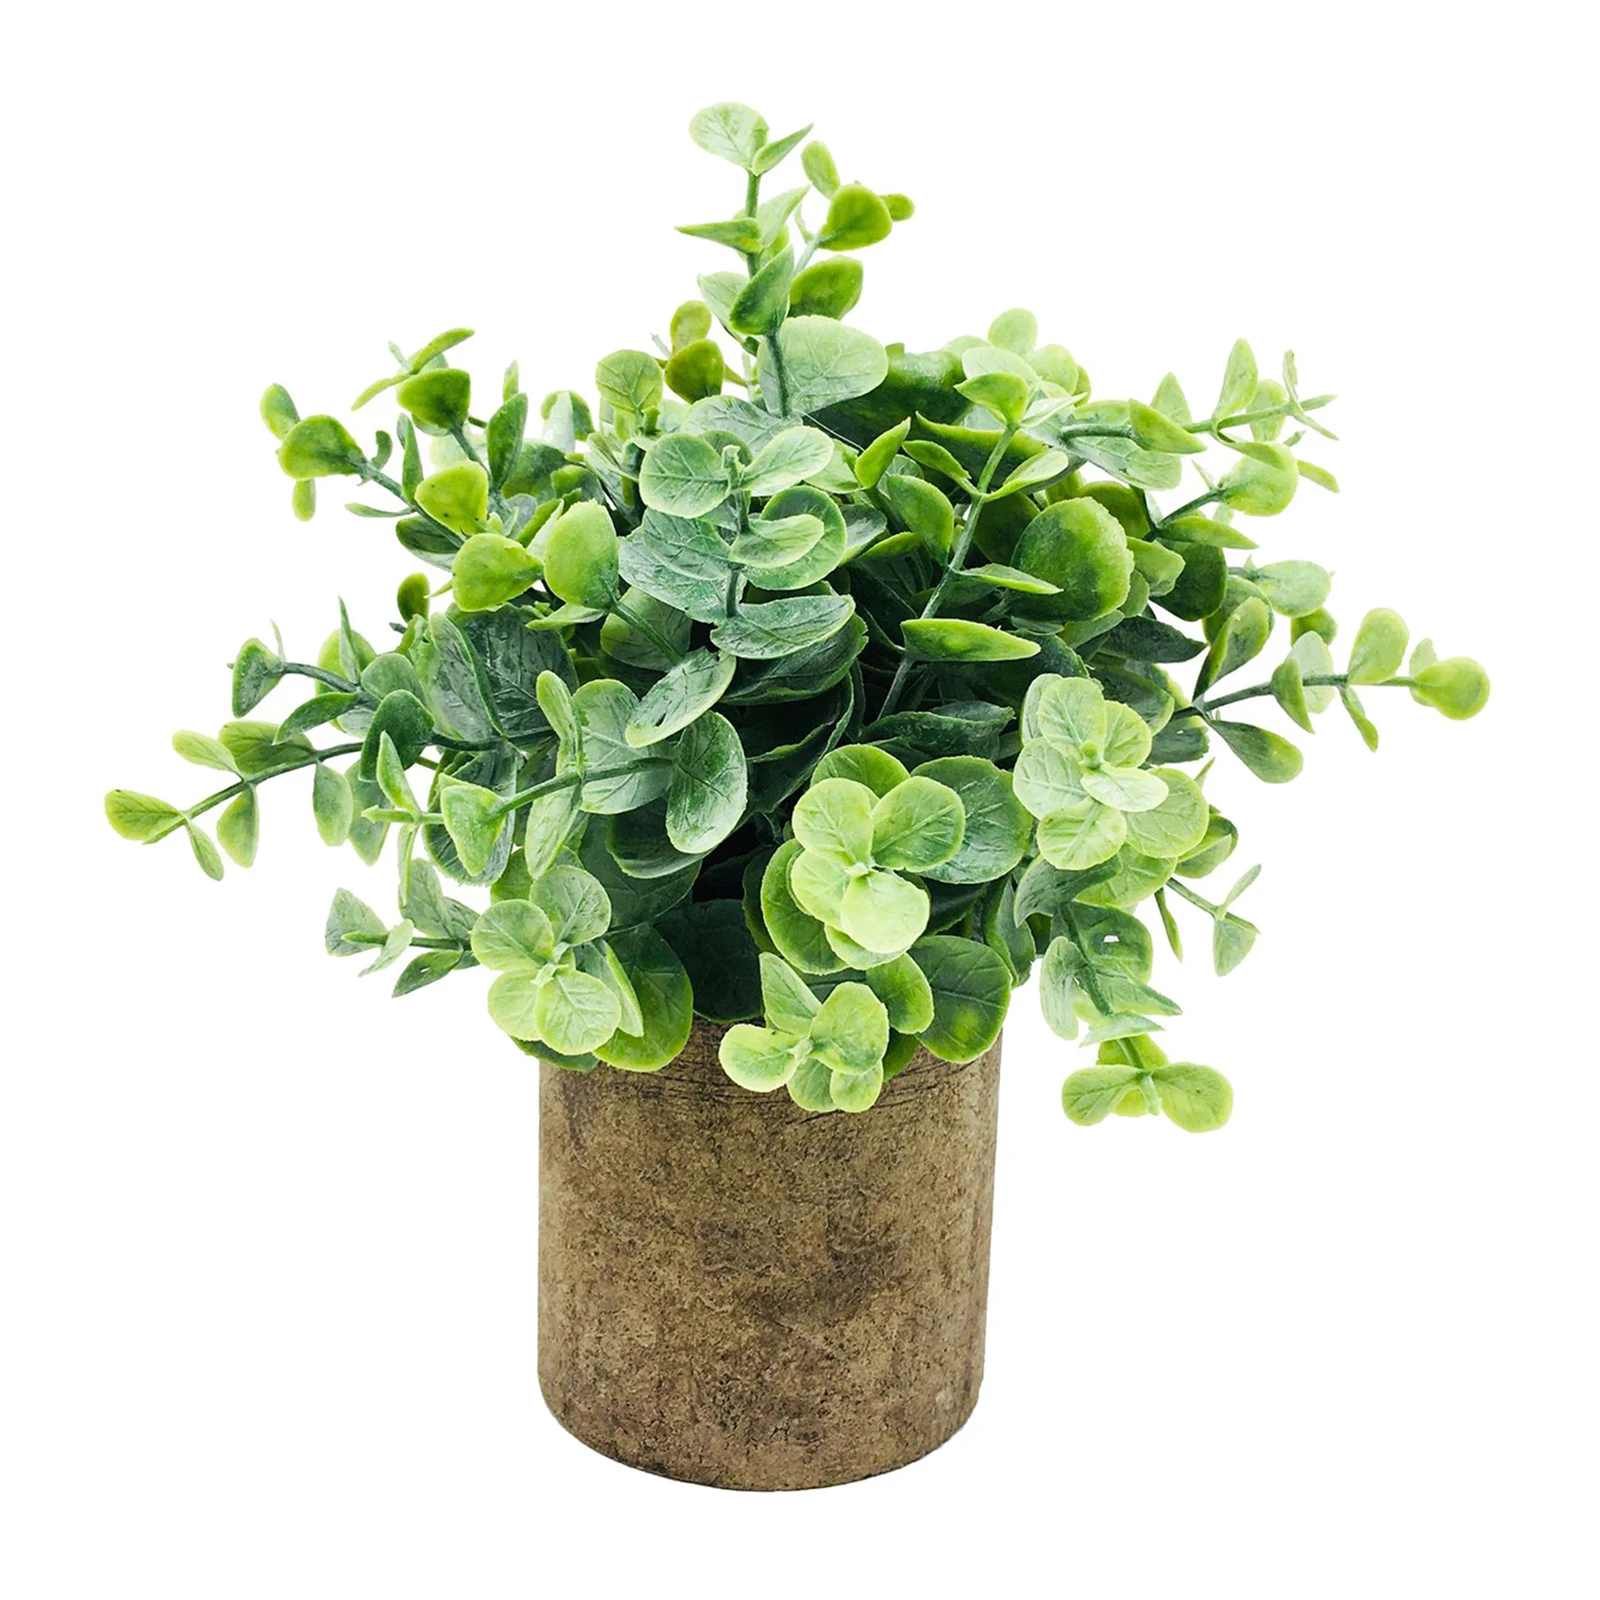 Faux Eucalyptus Plants Potted, Artificial Plant in Pot Fake Green Plant Bonsai for Office, Home, Kitchen, Table Indoor Decor